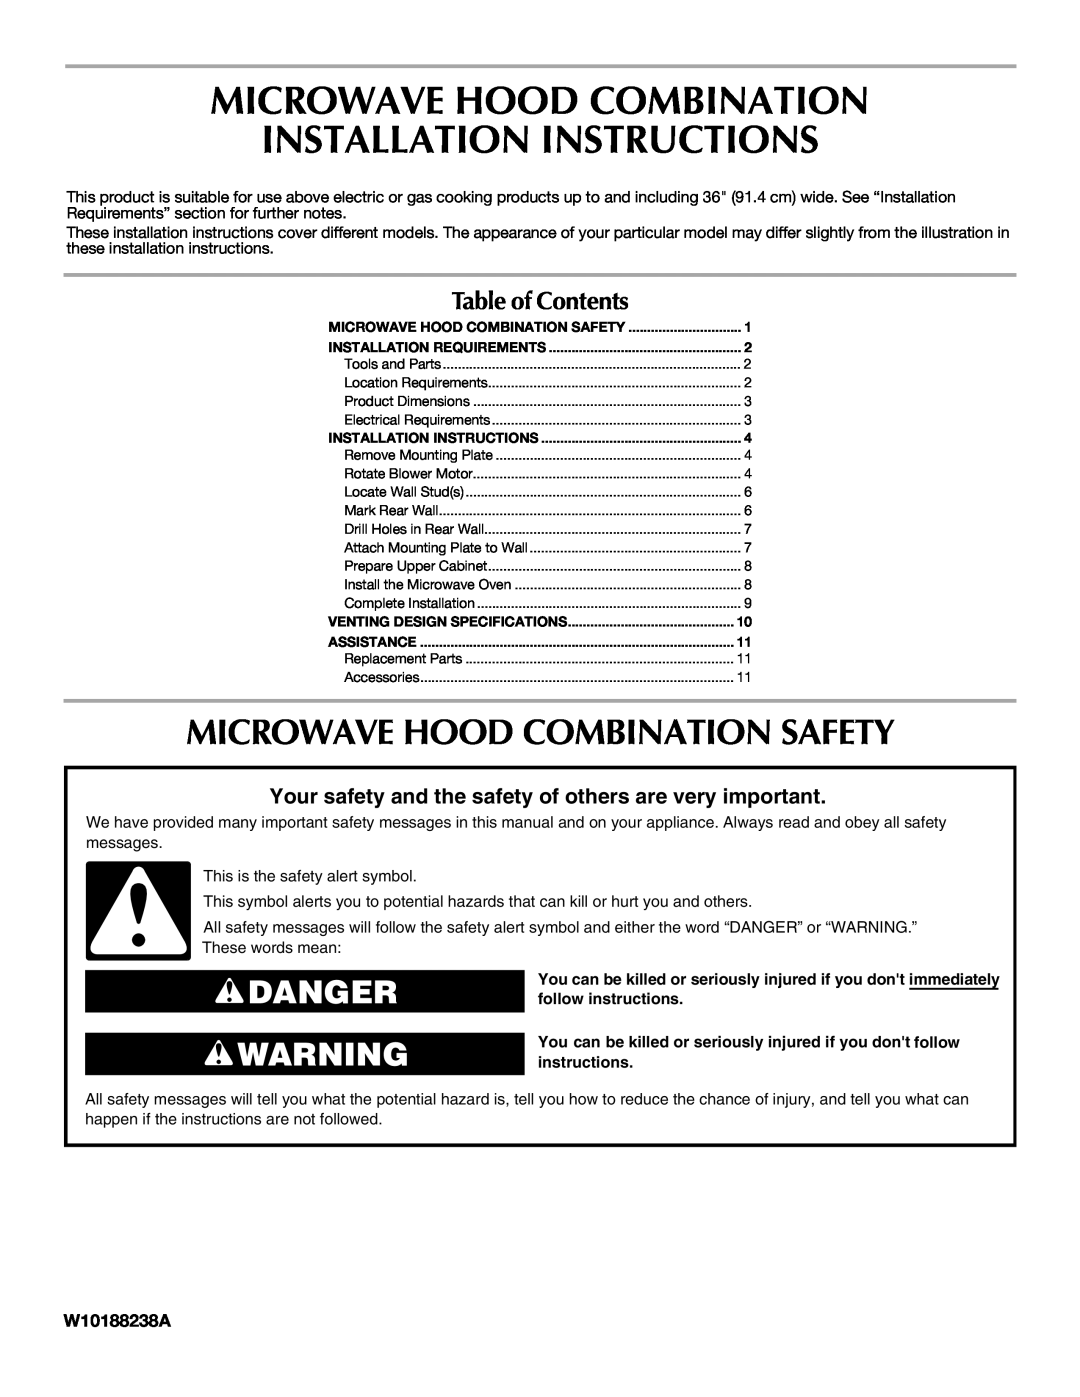 Maytag W10188947A installation instructions Microwave Hood Combination Safety, W10188238A, Danger, Table of Contents 